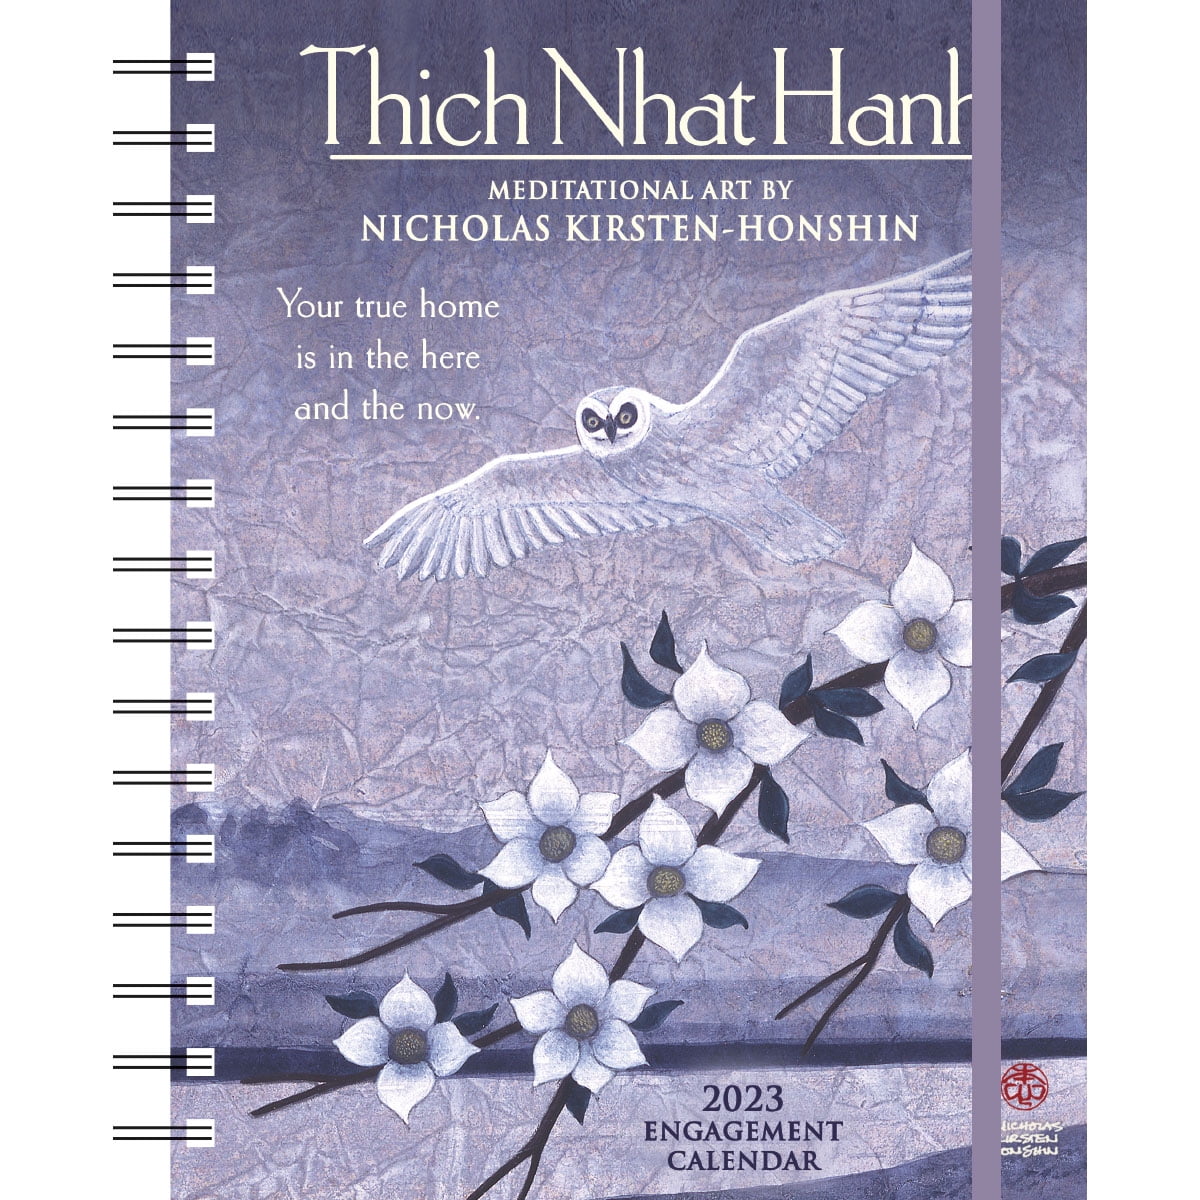 thich-nhat-hanh-2023-engagement-calendar-paintings-by-nicholas-kirsten